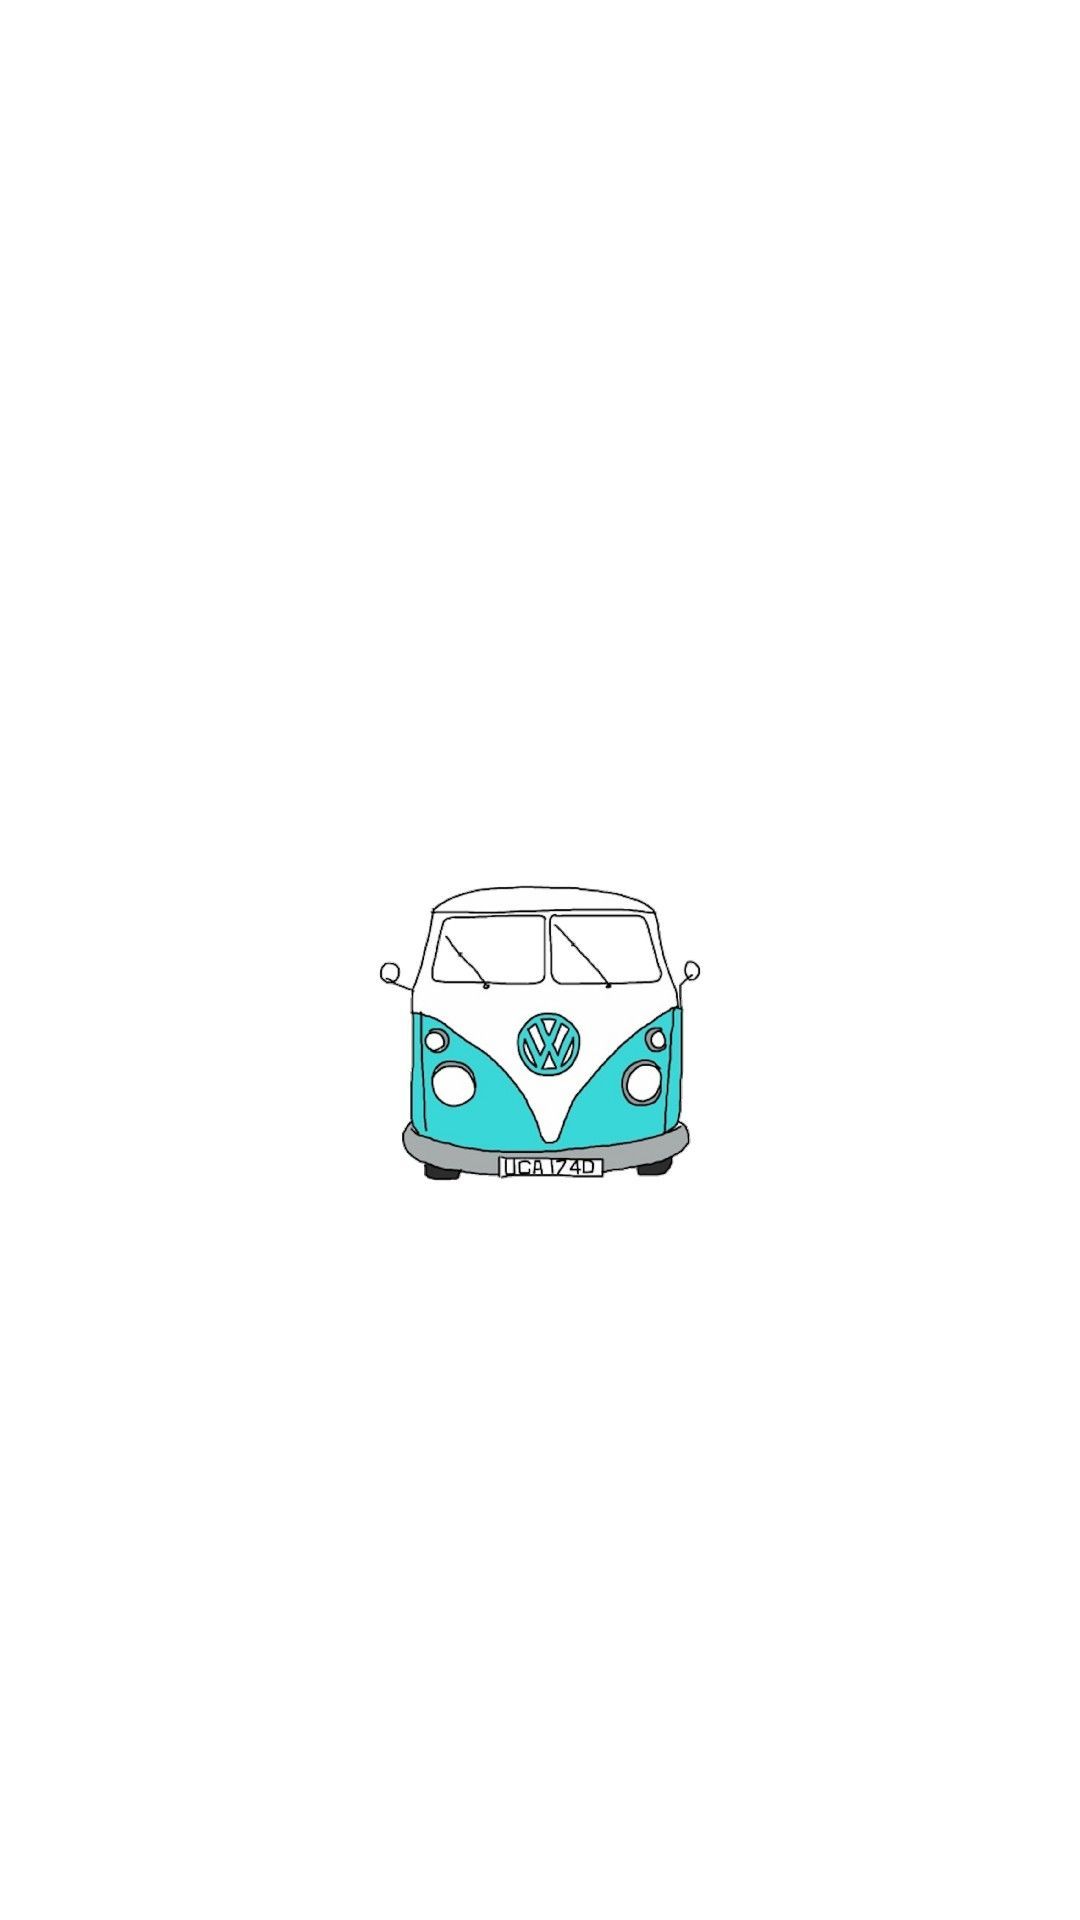 Illustration of a turquoise and white VW camper van on a white background - Apple Watch